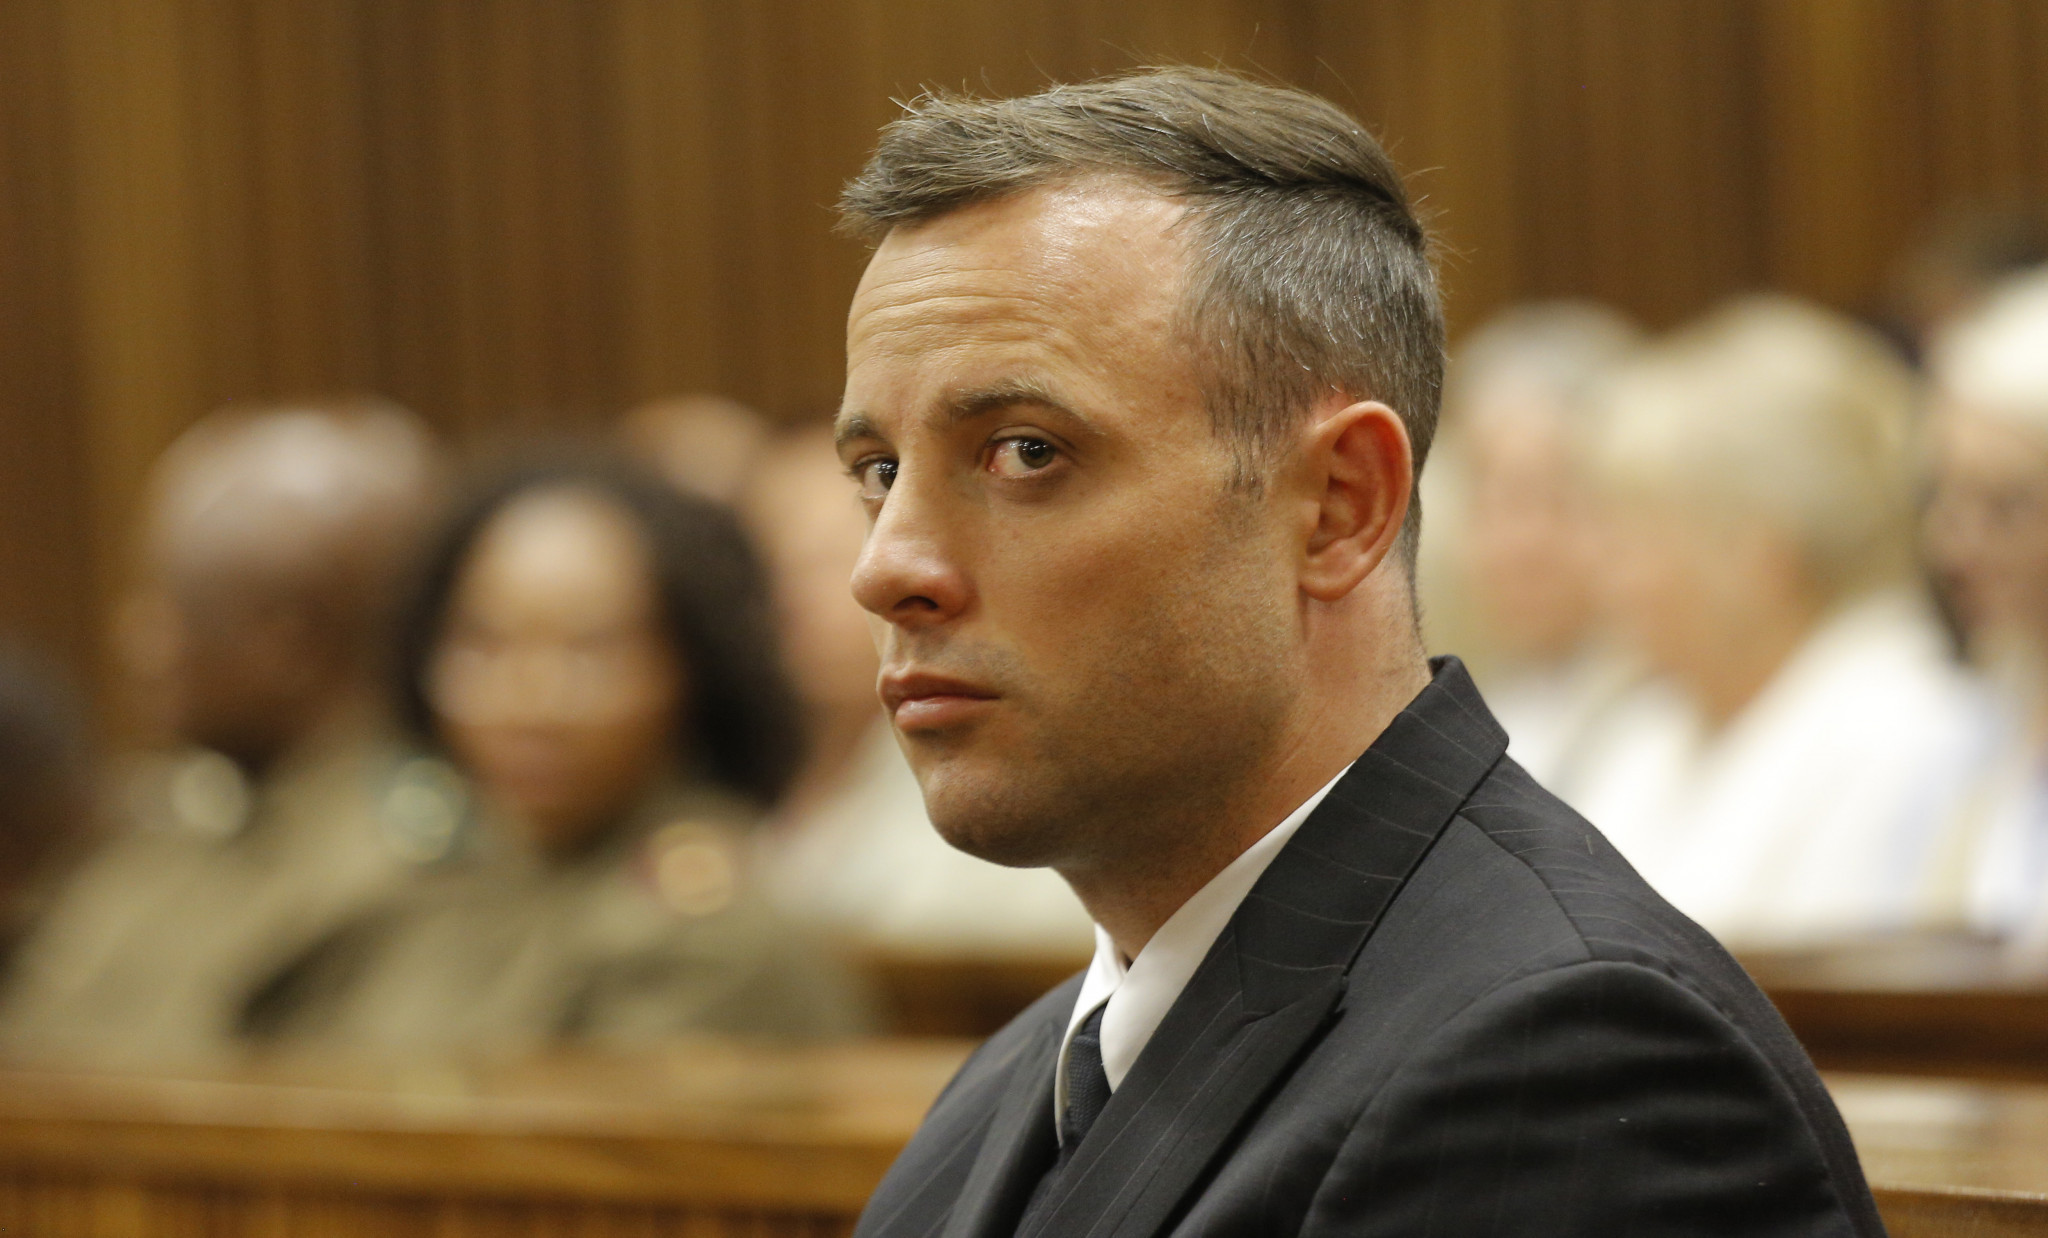 Parents of Reeva Steenkamp say six-time Paralympic champion Pistorius should remain in jail for life for murdering their daughter 